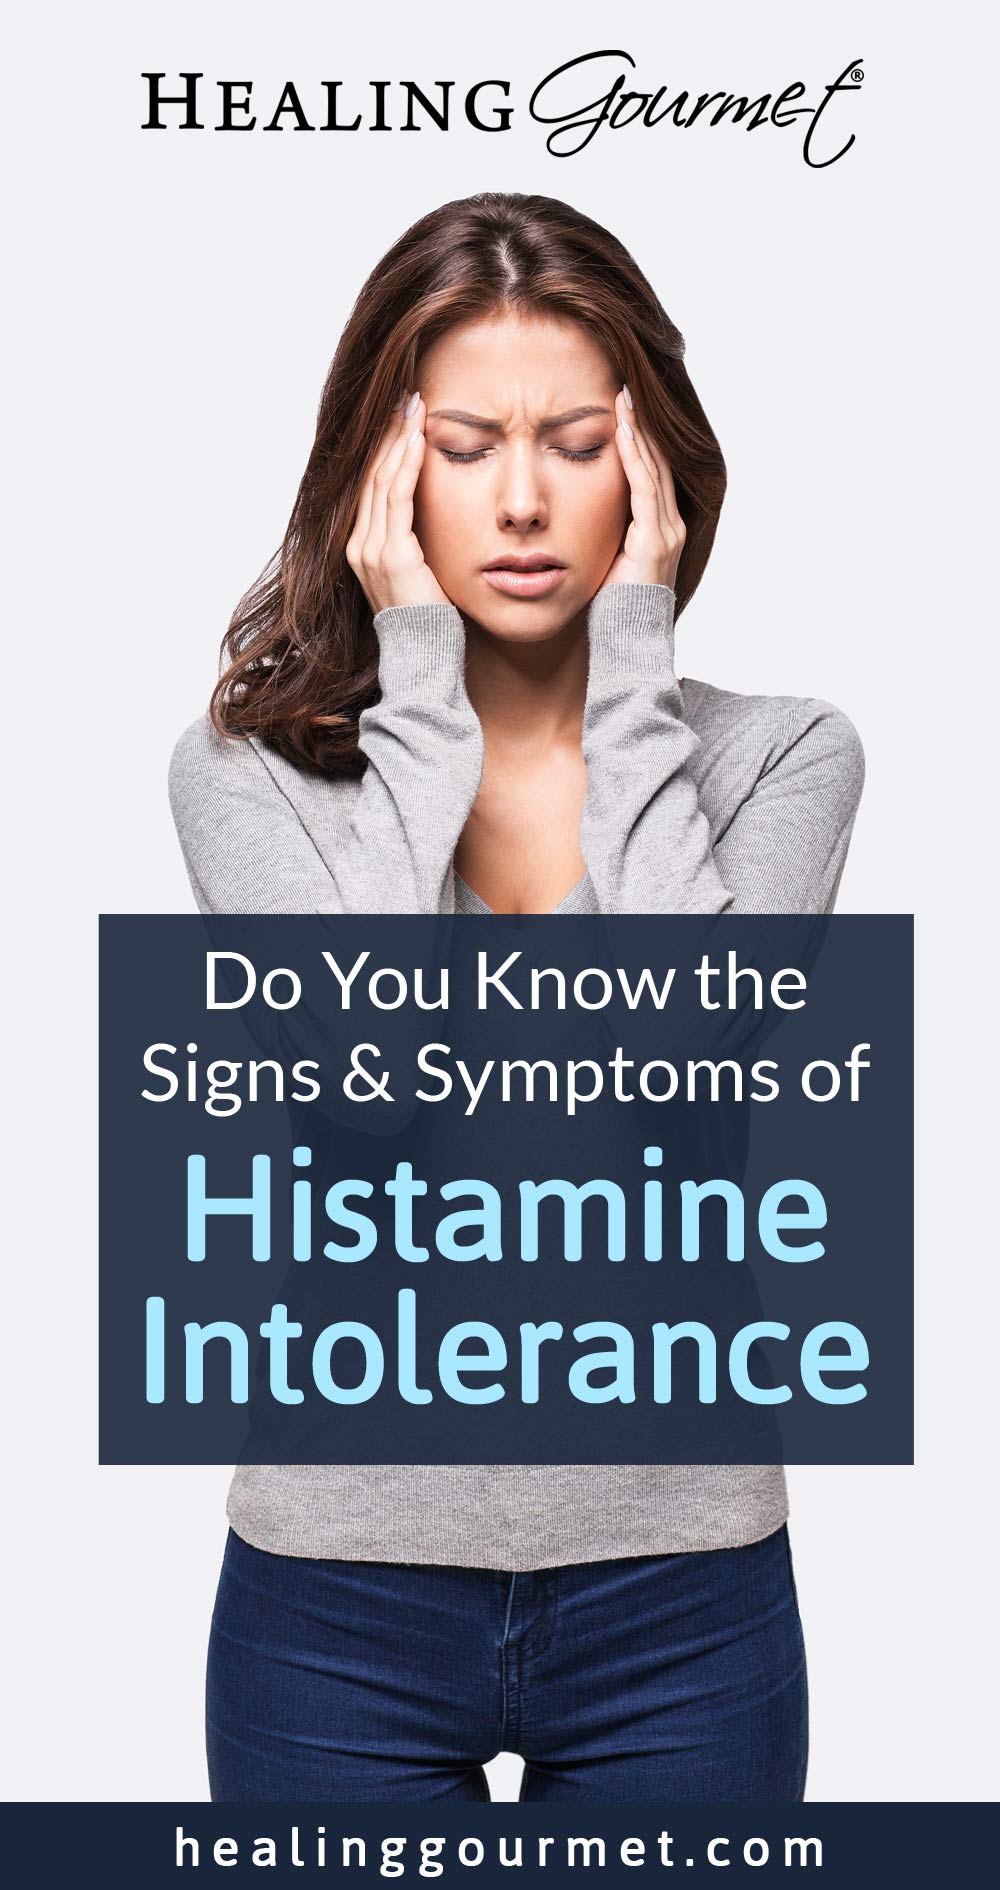 Do You Suffer from Histamine Intolerance?